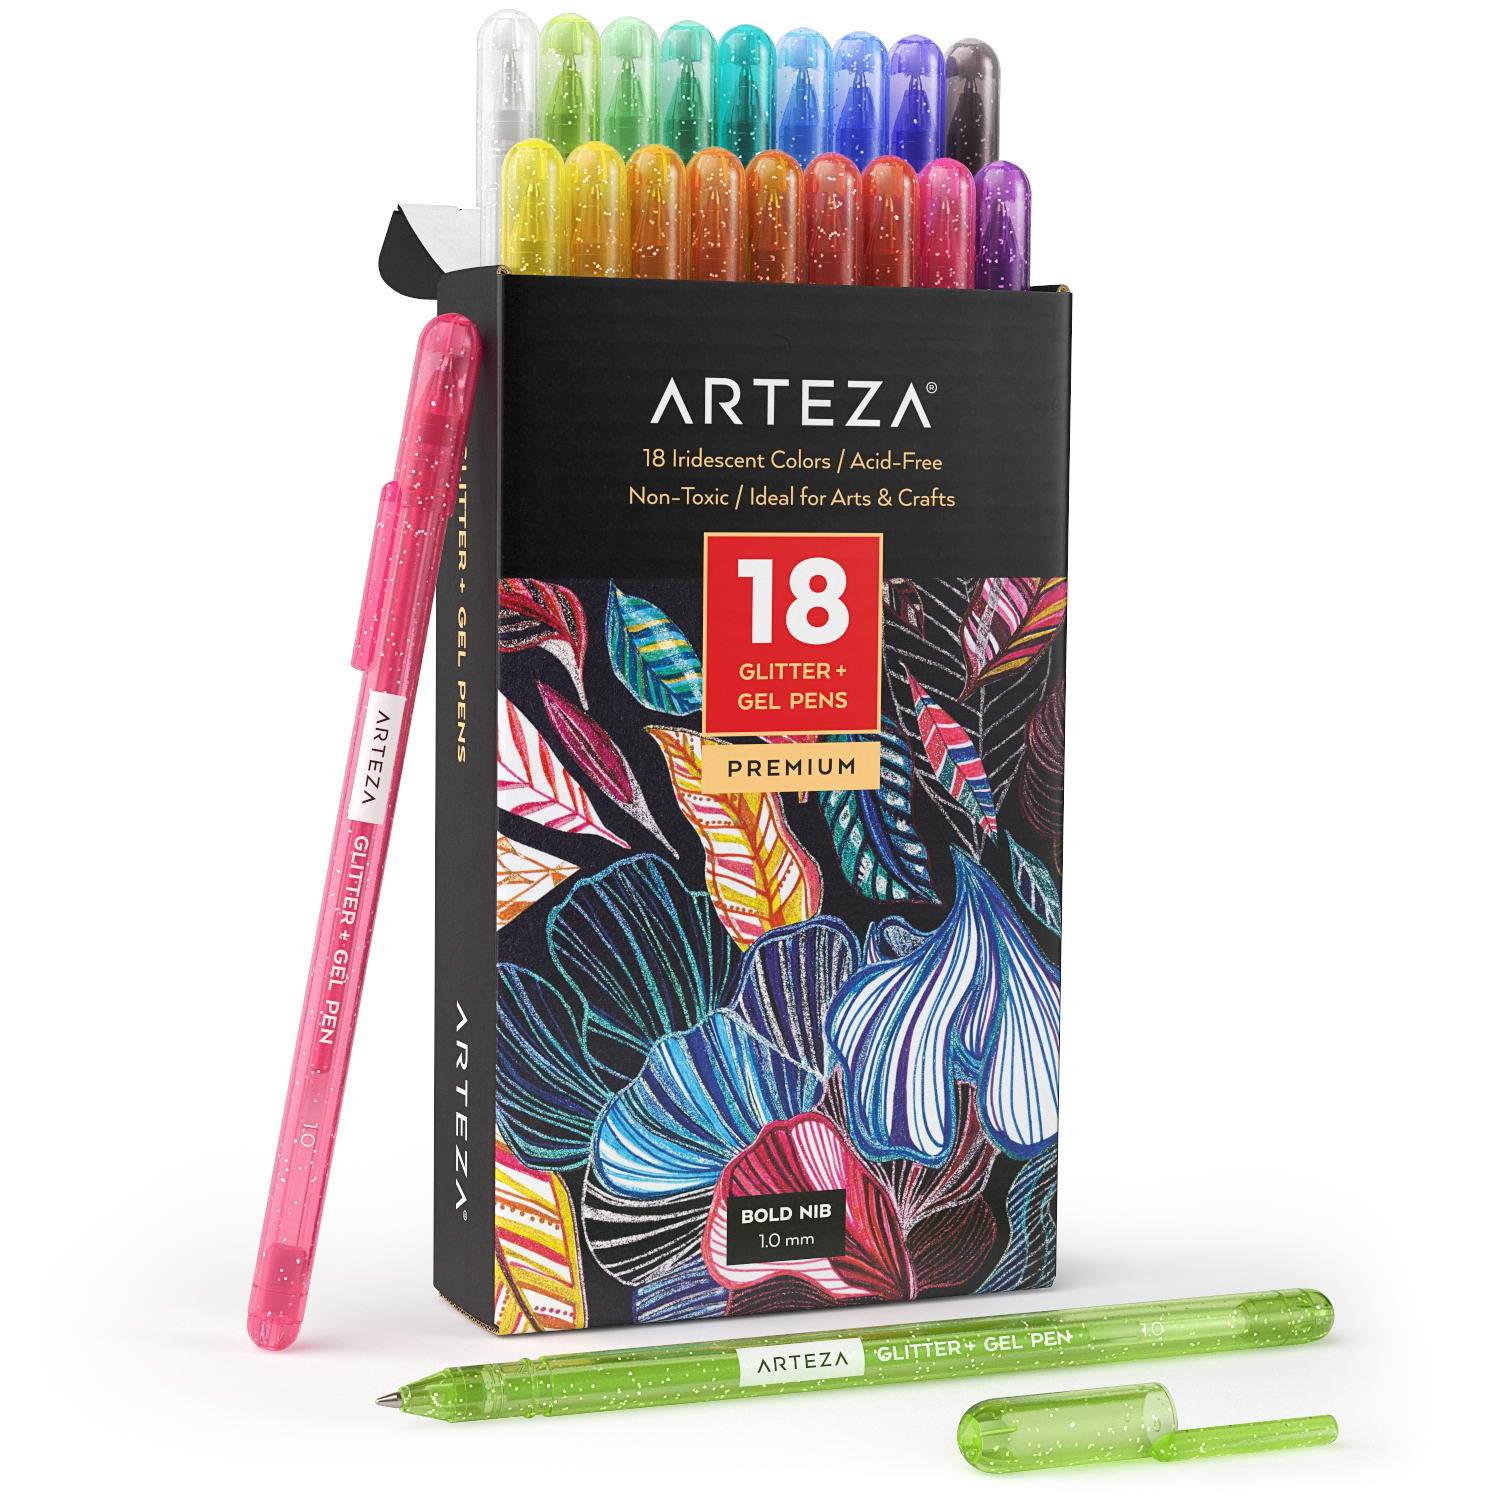 PINTAR Glitter Pens for Adults and Kids - Glitter Stylus Pens Fine Point -  Extra Fine 0.7mm Tip Paint Pens - Acrylic Glitter Markers - Acrylic Paint